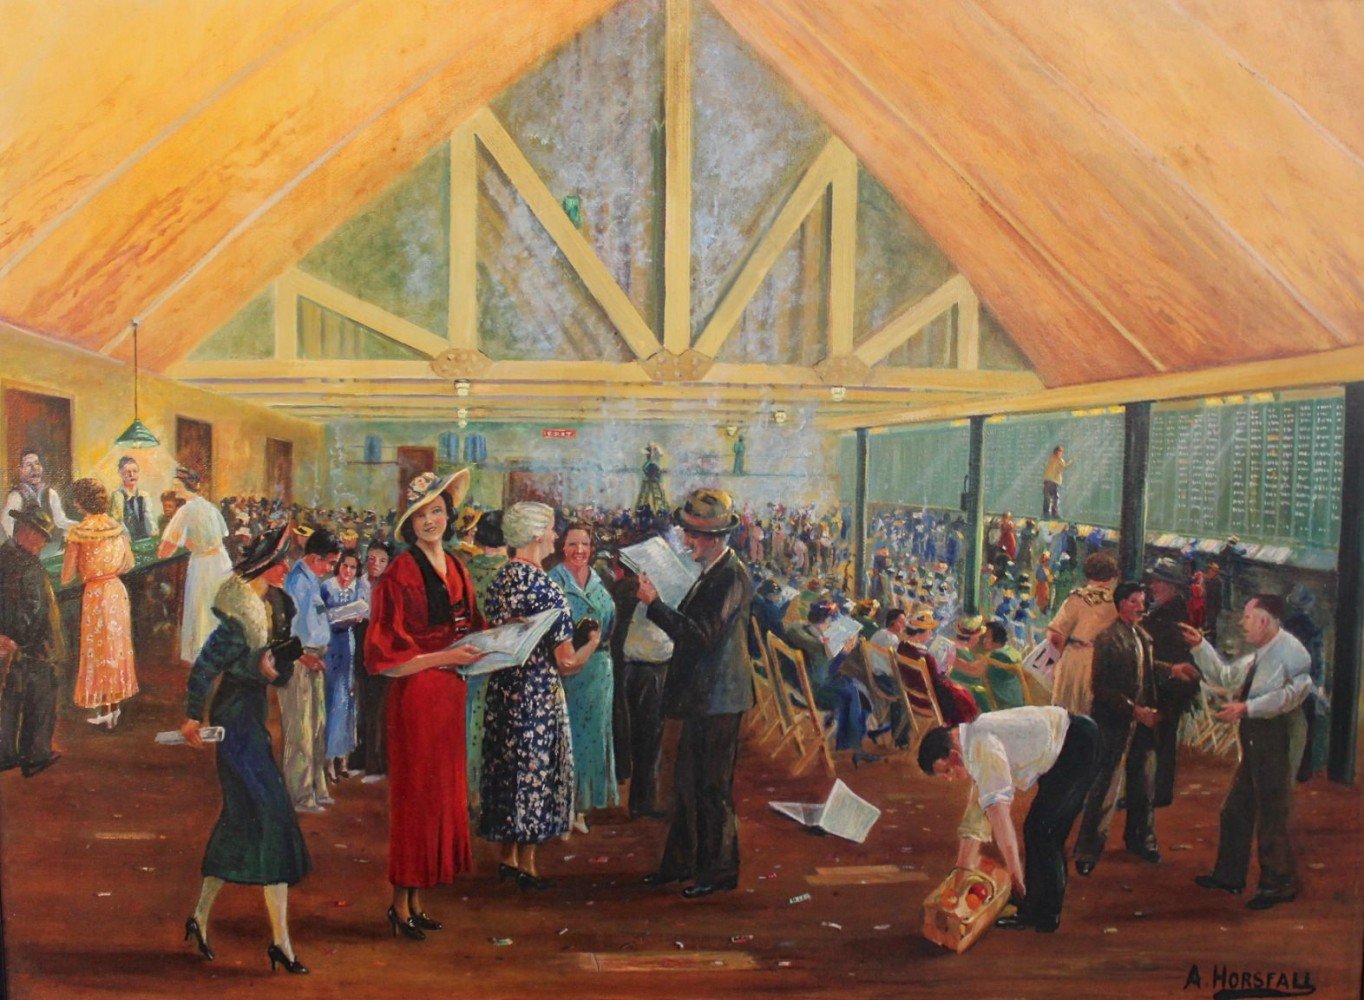 With The Bookies by Arthur Horsfall